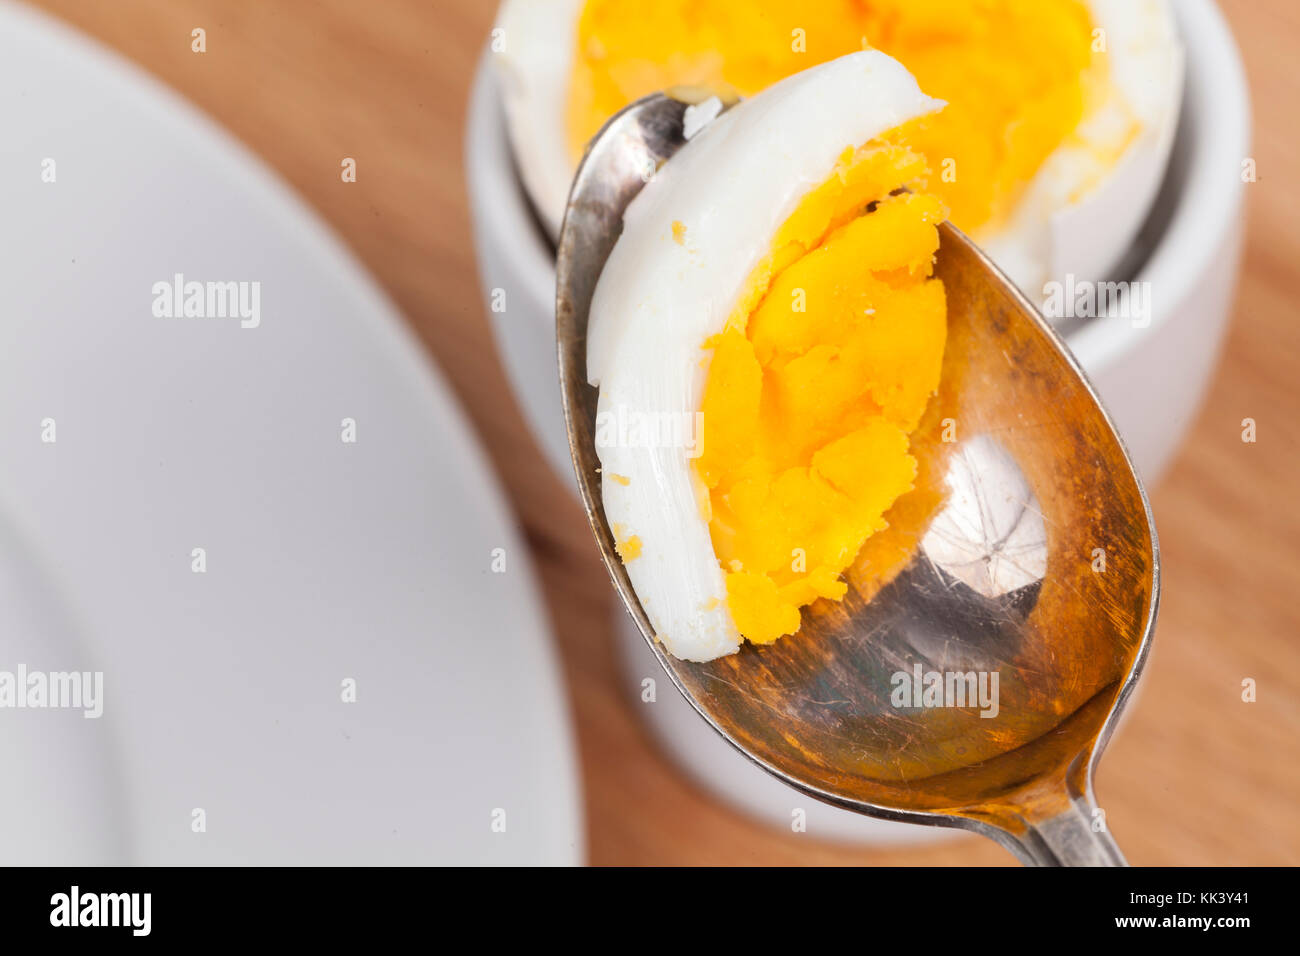 Eat an egg with a spoon Stock Photo